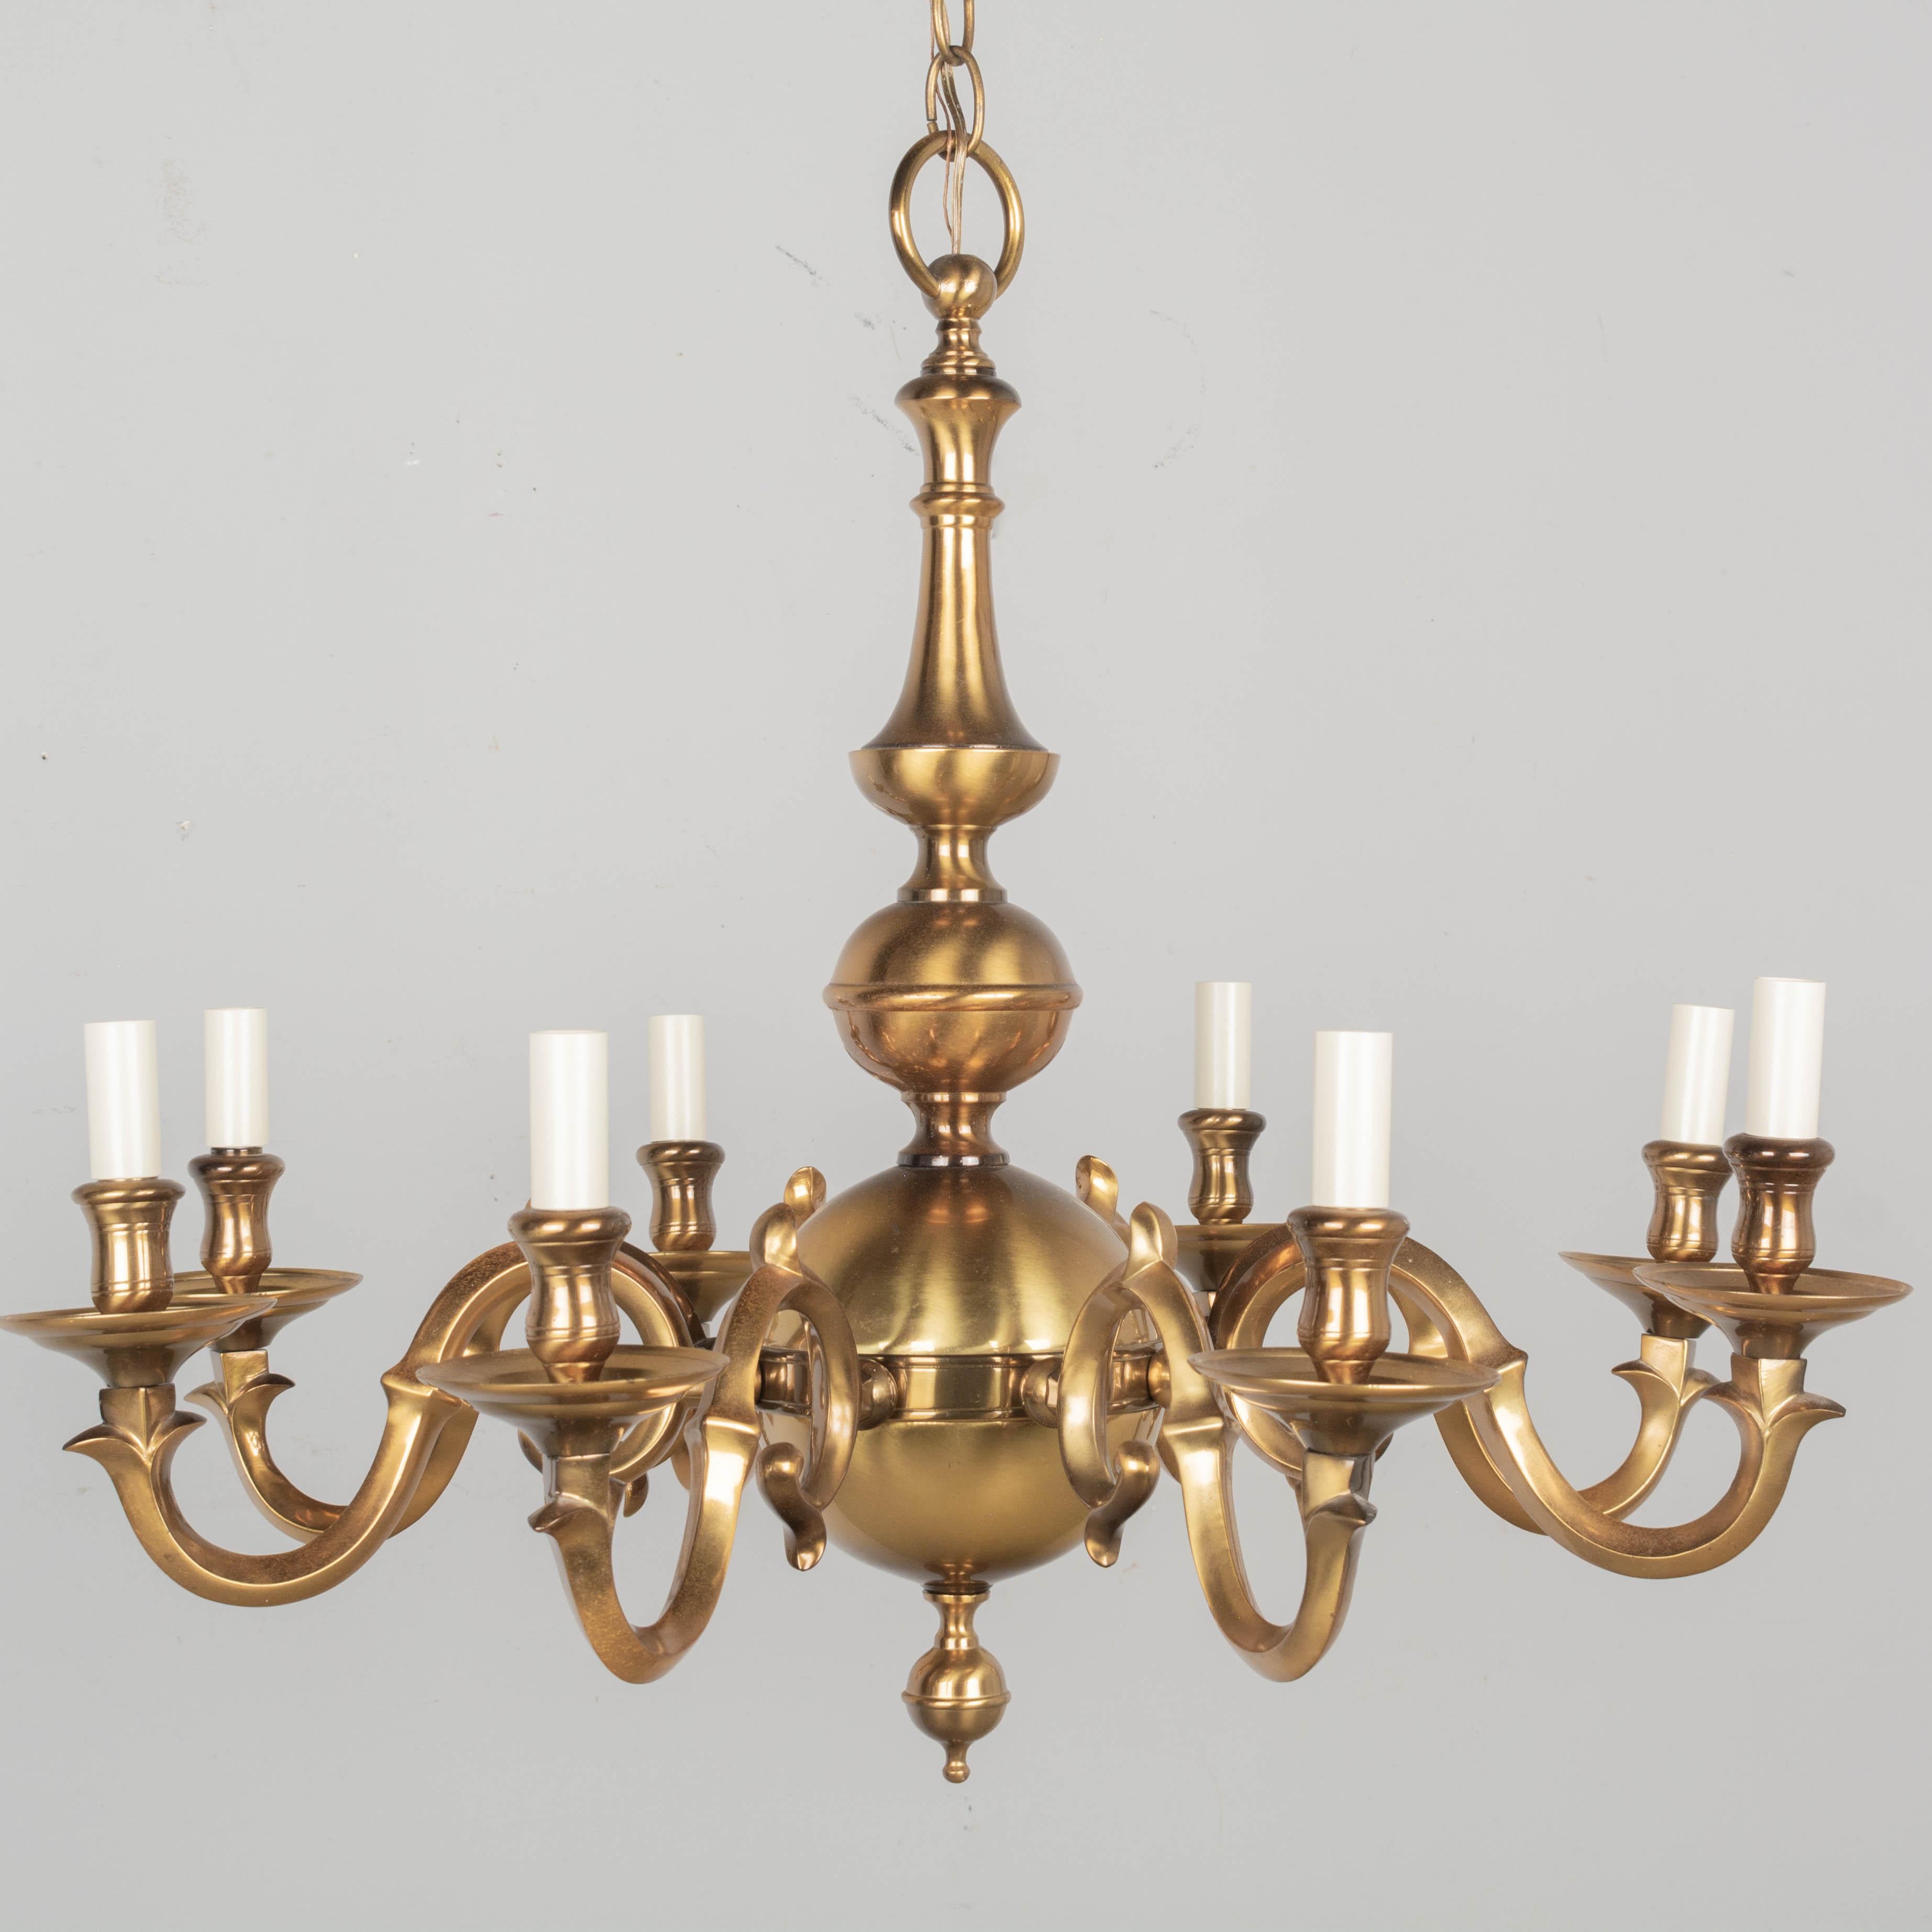 A vintage Dutch Colonial eight-light chandelier with large brass sphere. Good quality heavy solid brass. In working condition with new candle covers. Circa 1980s. 
Dimensions: 26.5